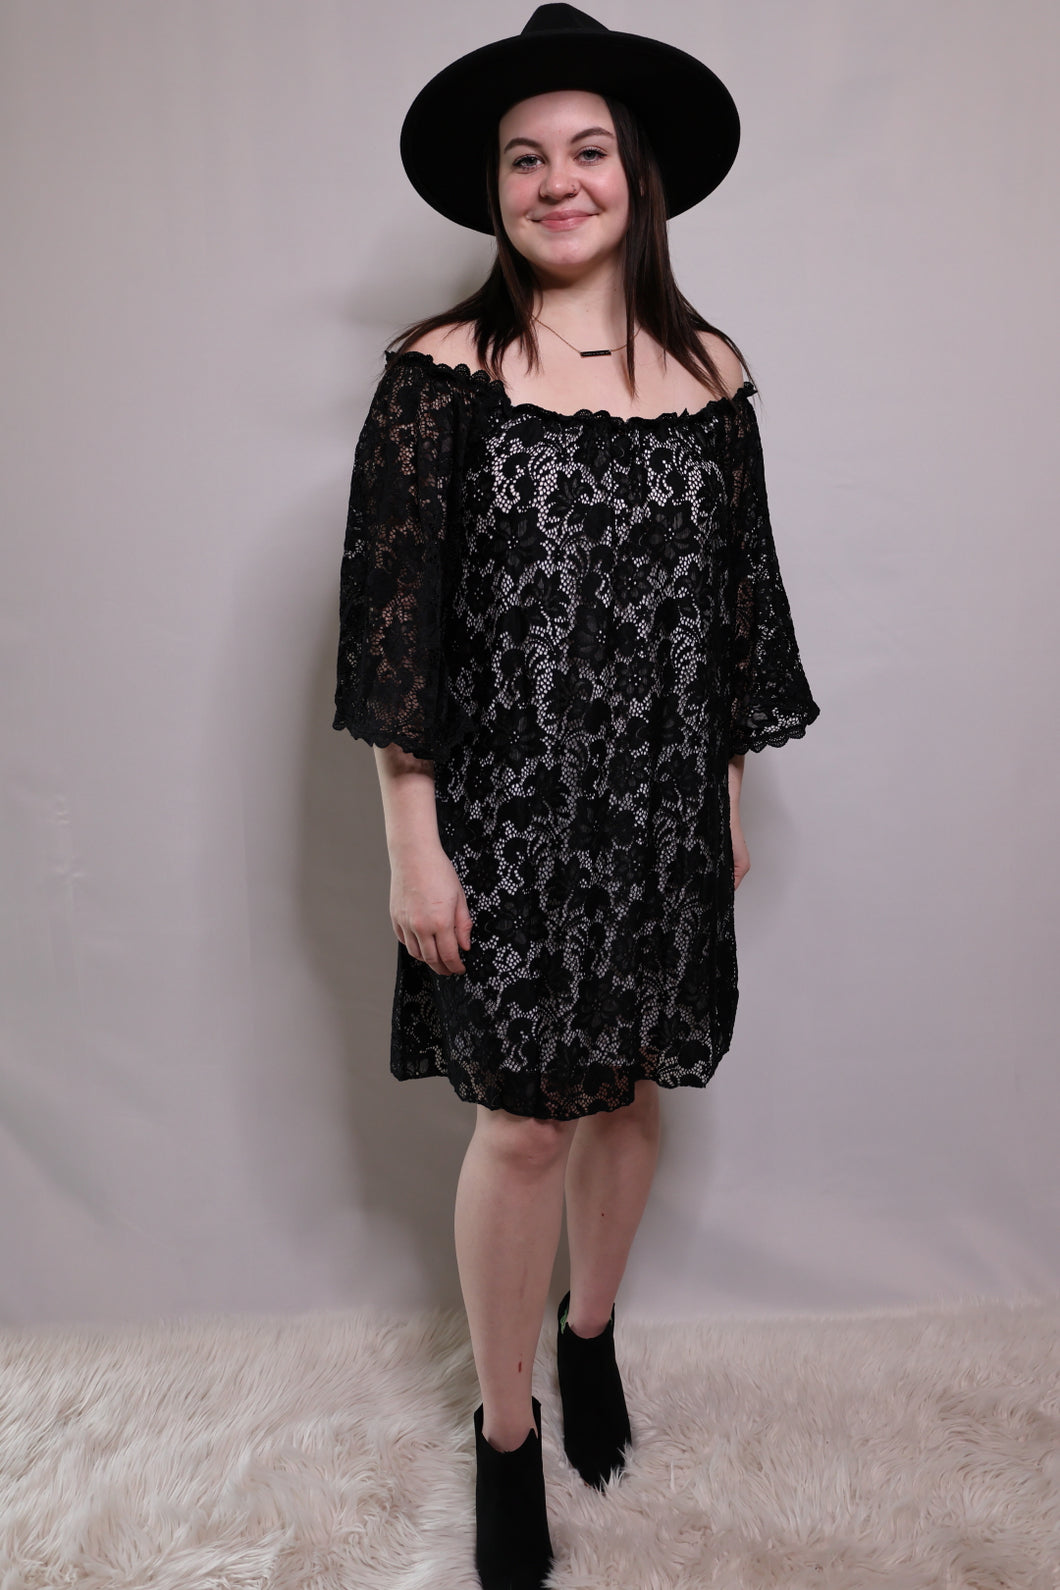 Dance With Me Off Shoulder Lace Dress by LuvLeigh Apparel